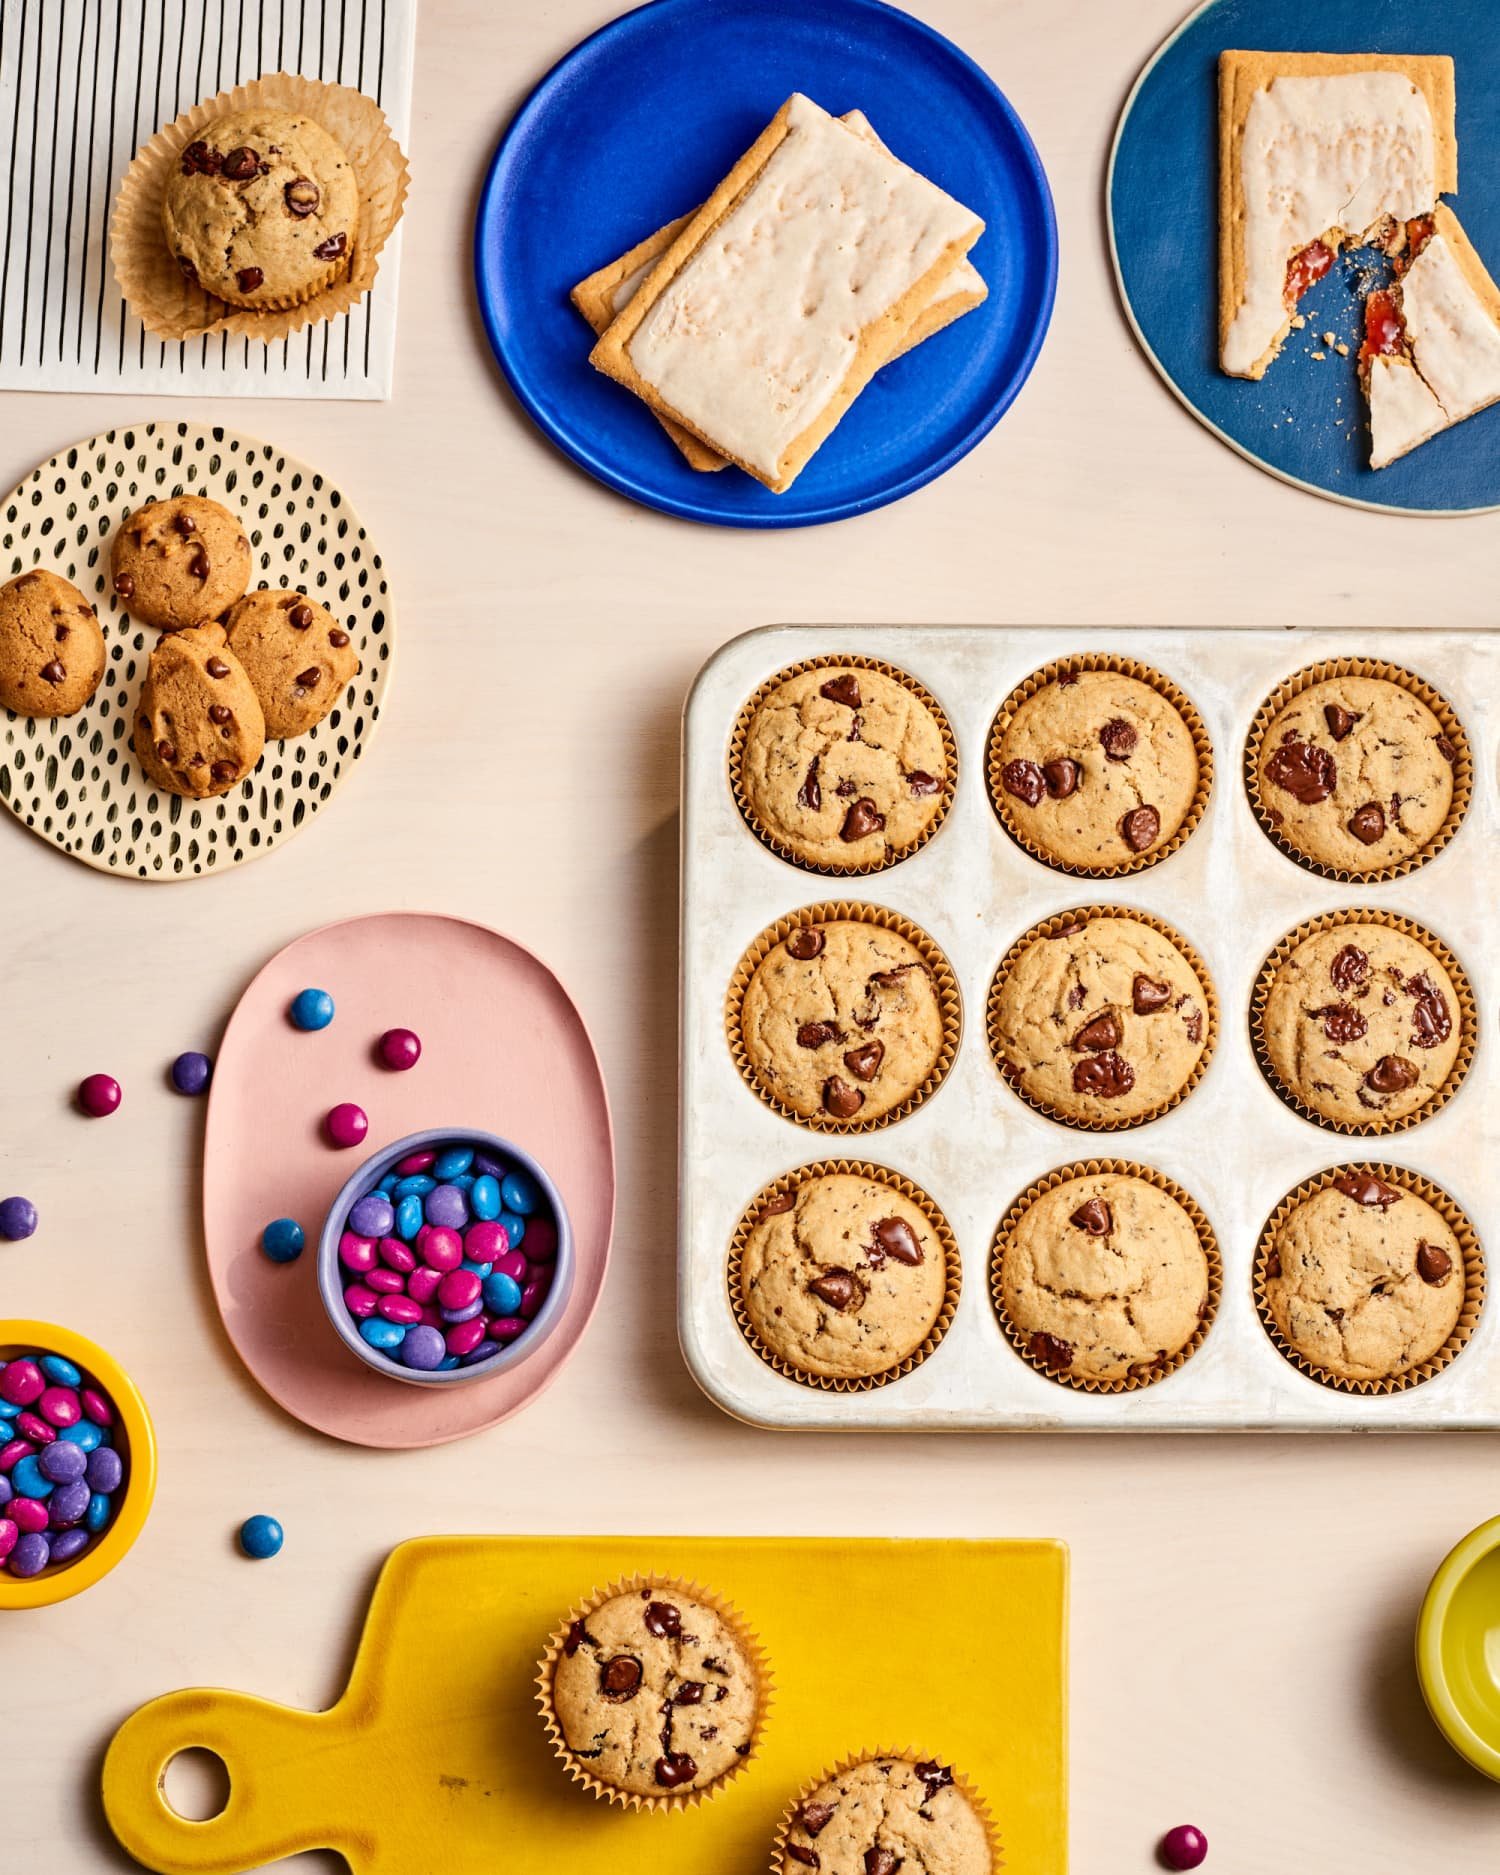 These Grown-Up Treats Will Make You Feel Like a Kid Again